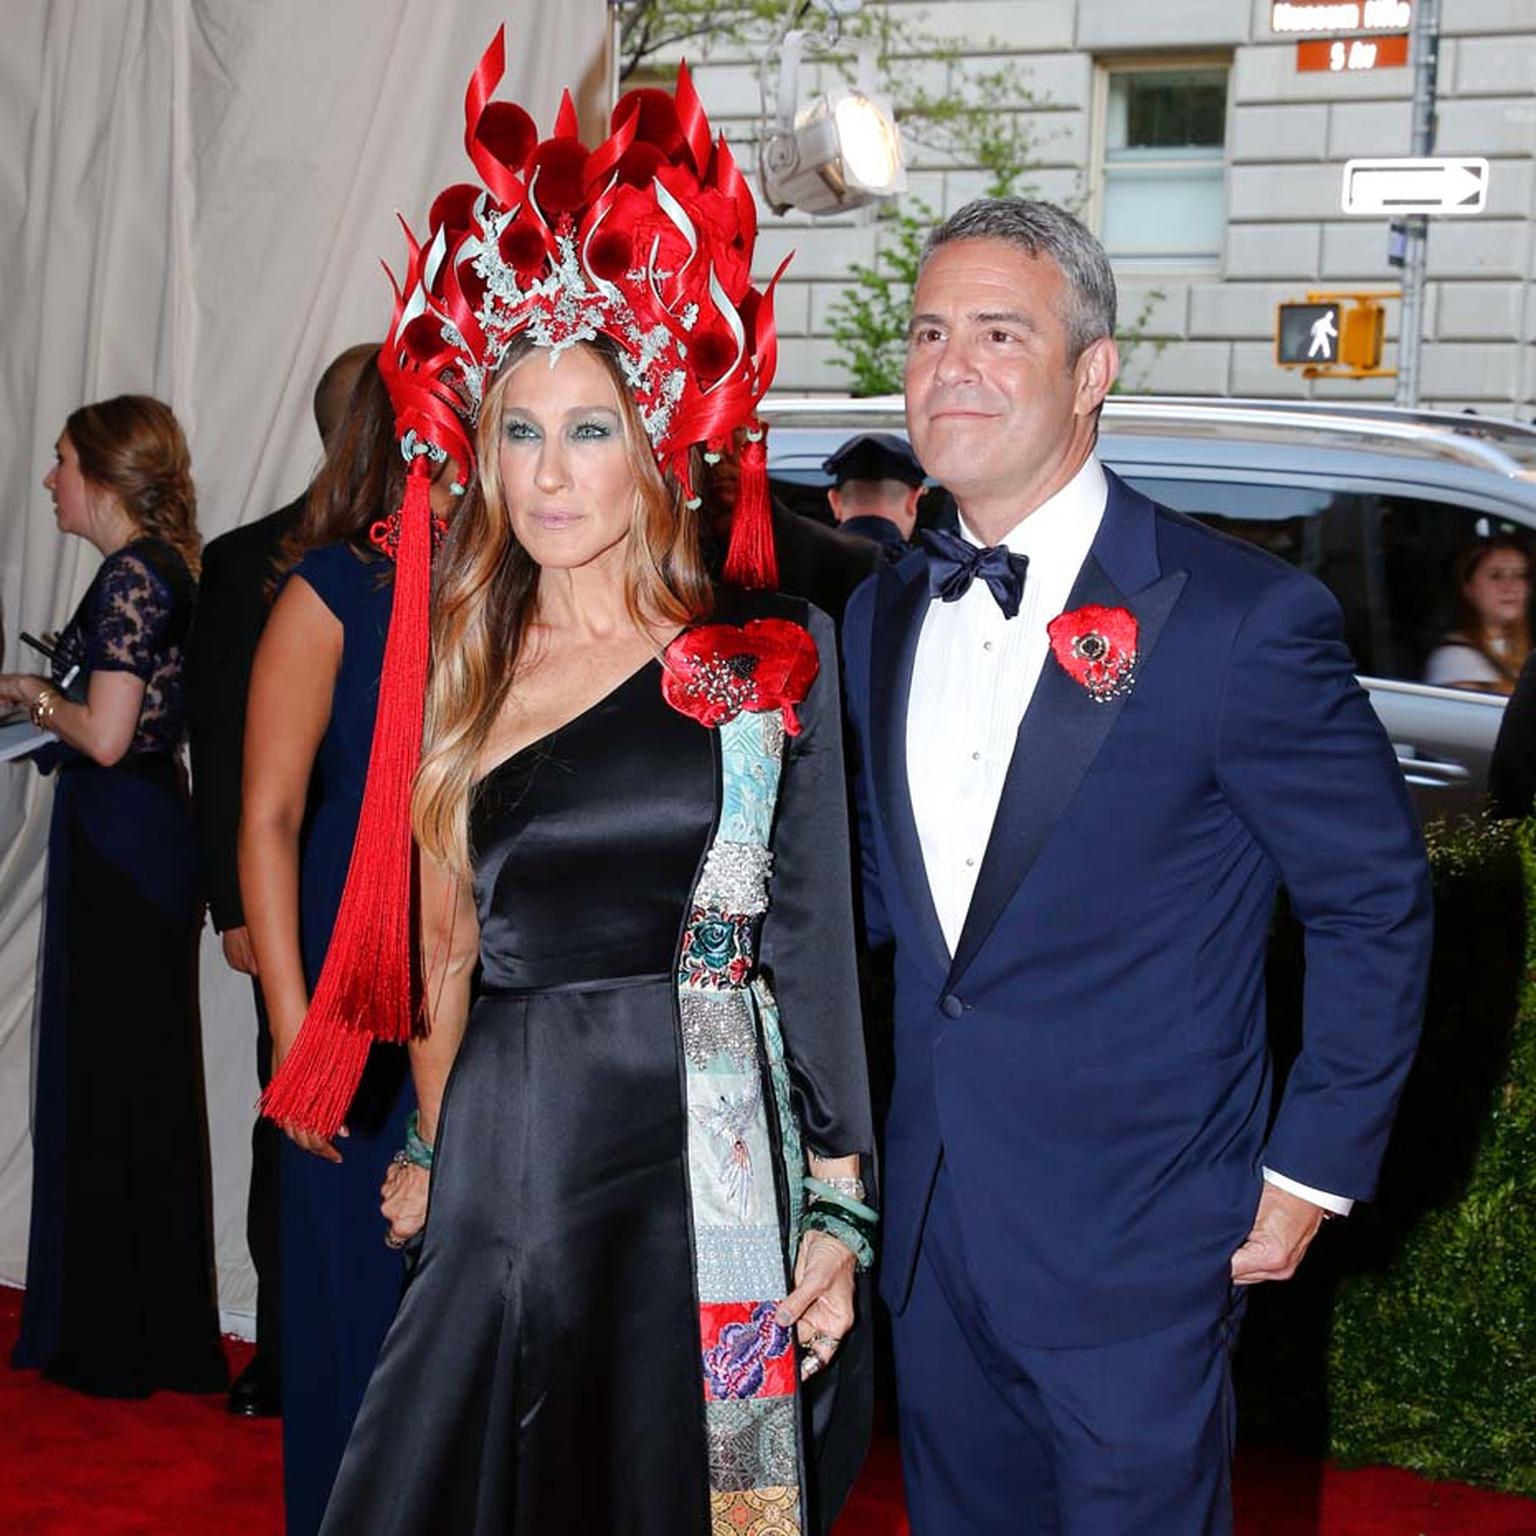 Sarah Jessica Parker may have divided opinion with her Philip Treacy flaming headdress, but her choice of high-street gown by H&M and Cindy Chao Winter Branches brooch, Jennifer Fisher custom-made jade bracelets and Fred Leighton diamond drop earrings was